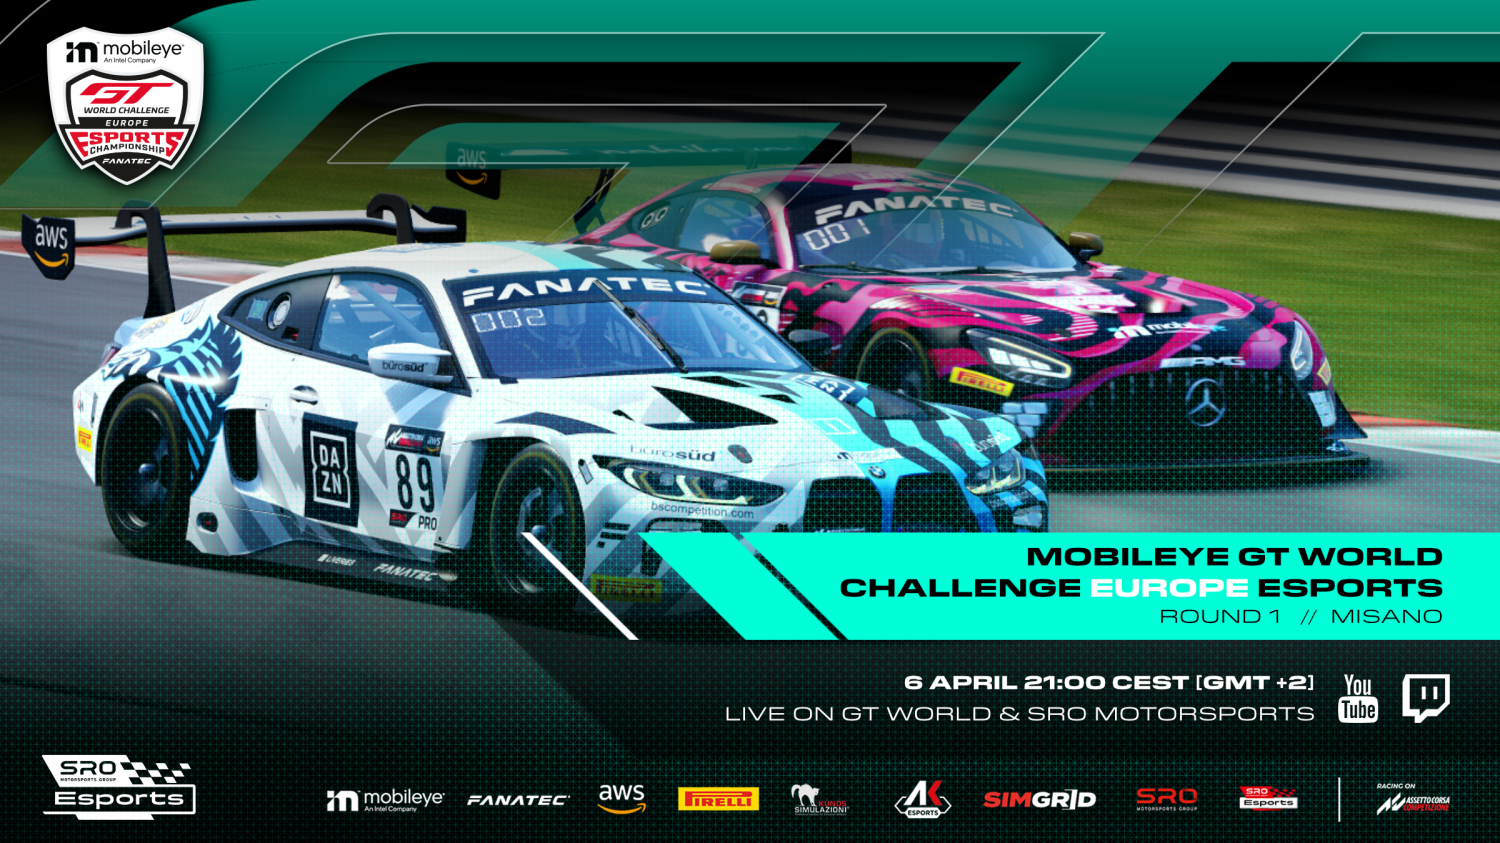 Mobileye GT World Challenge Europe Esports Championship ready to launch with Sprint Series opener at Misano